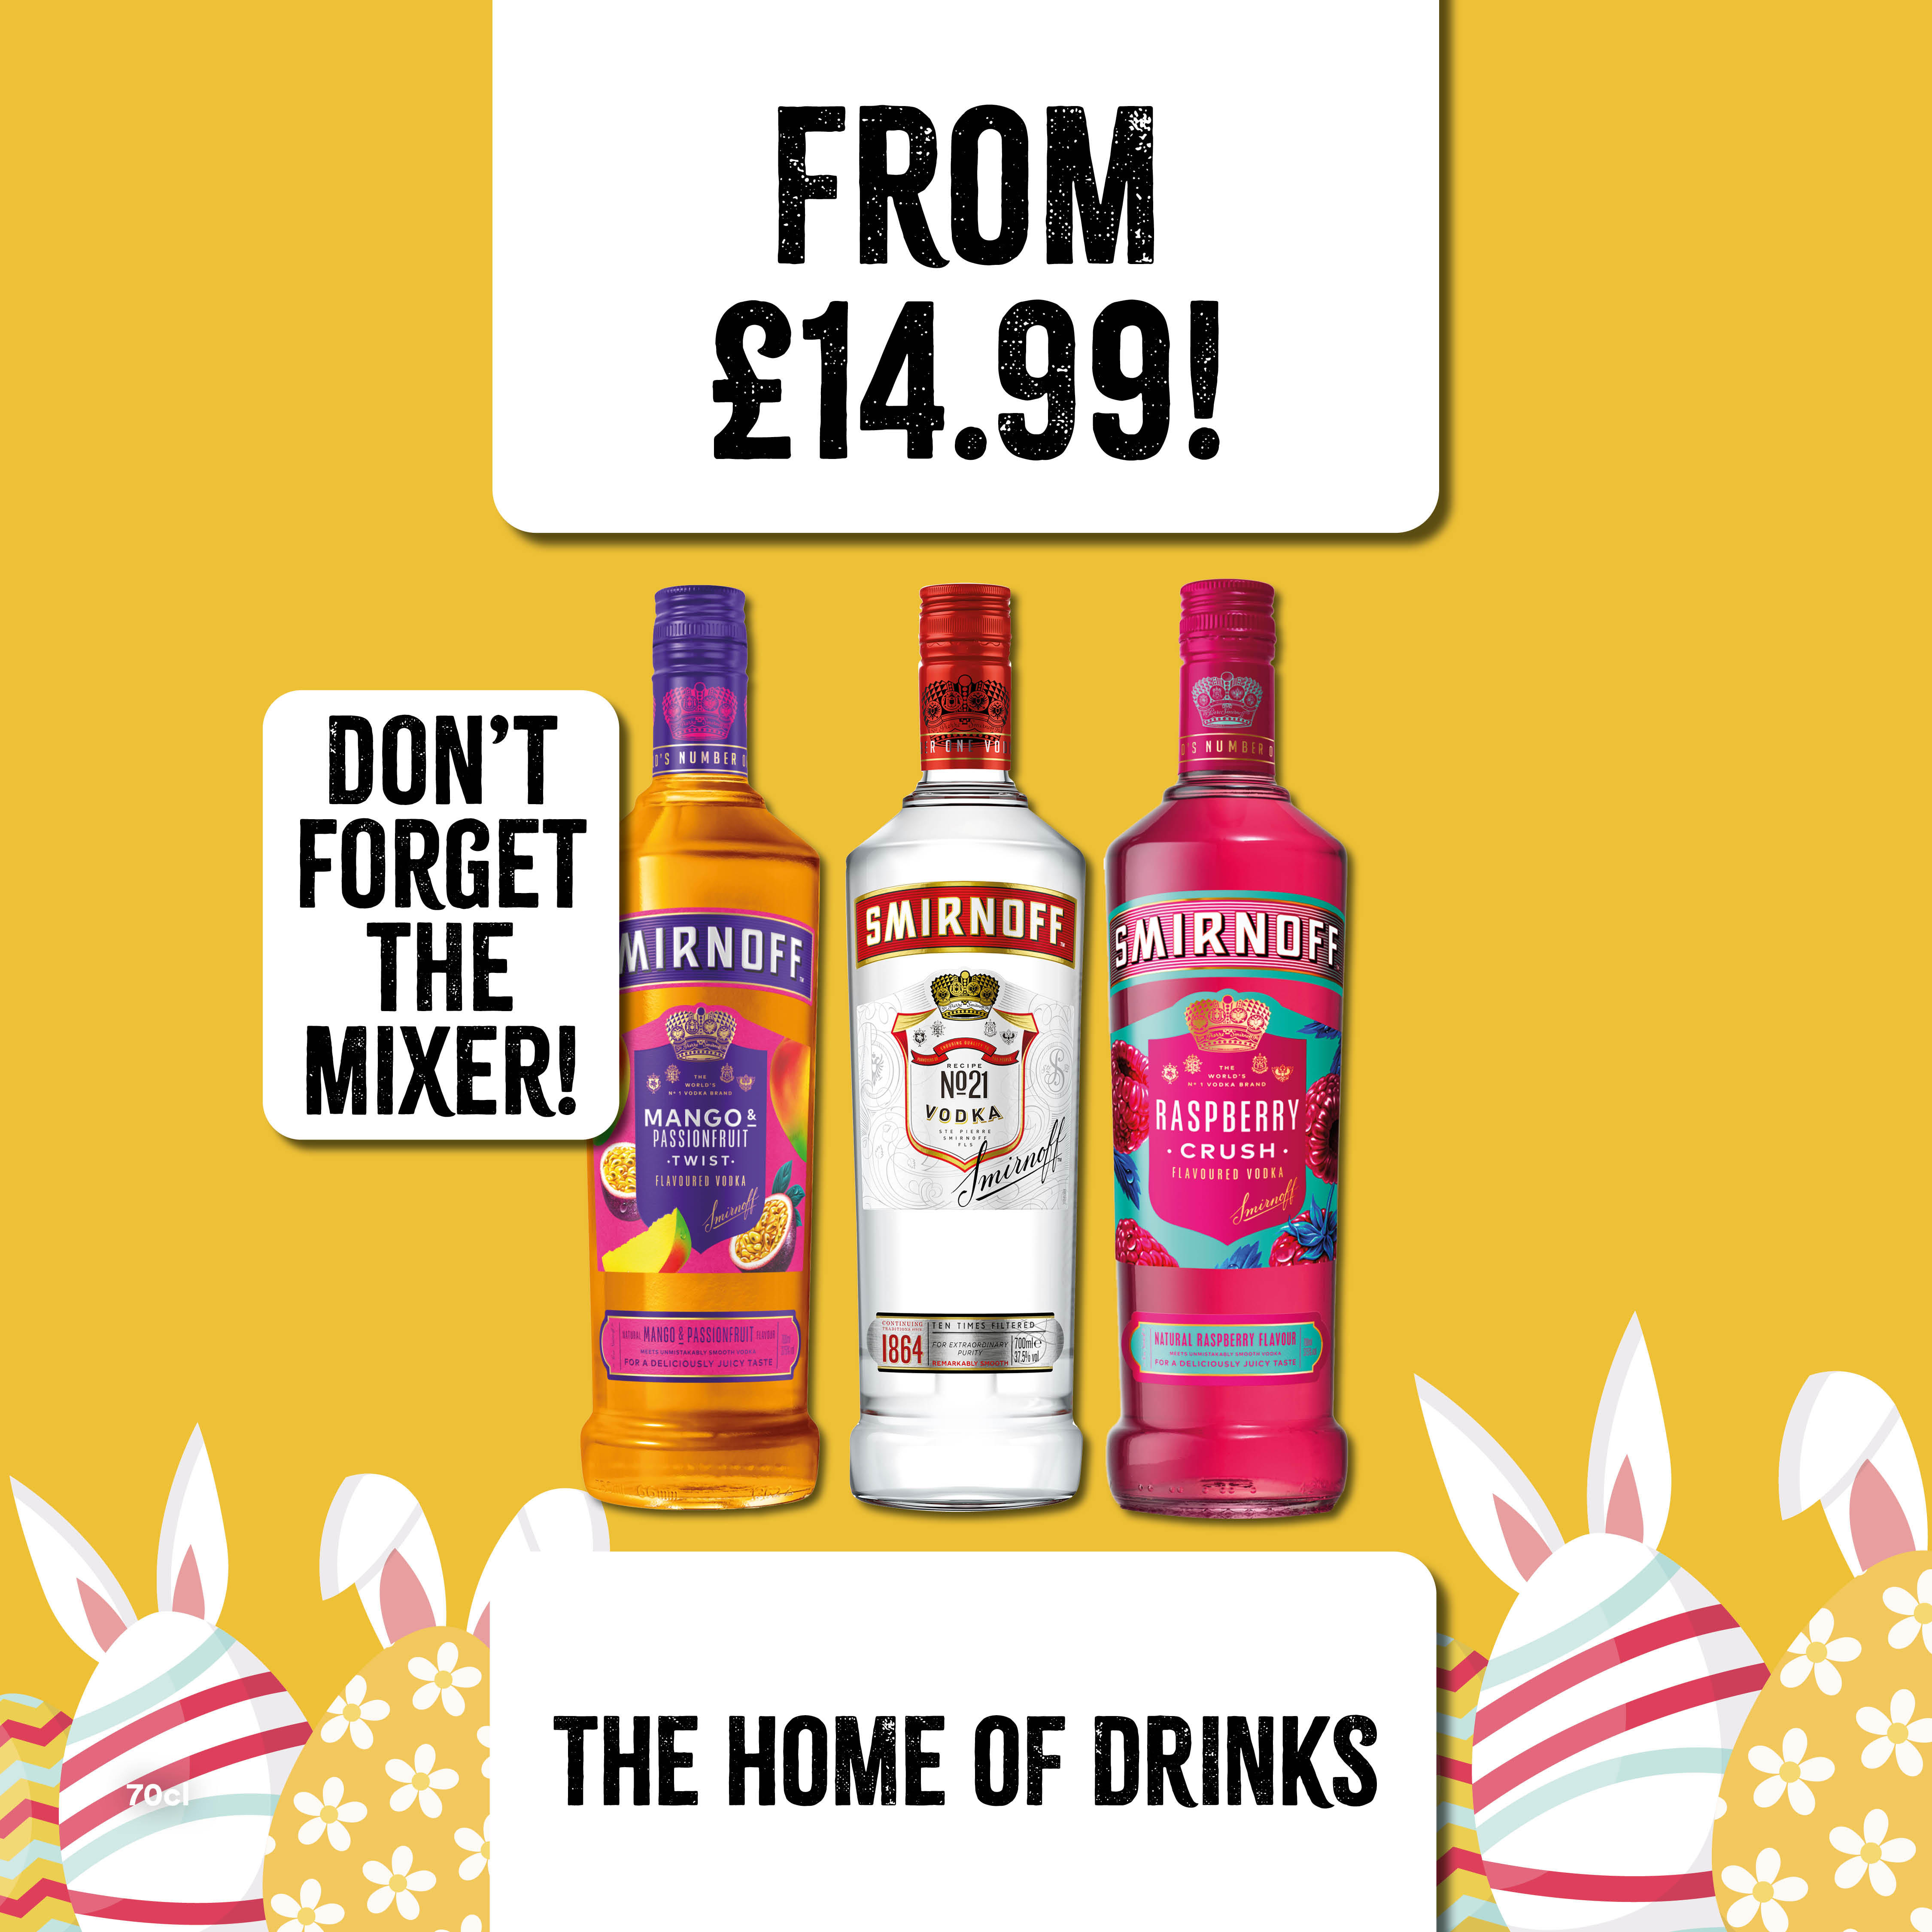 Smirnoff flavours - From £14.99 Bargain Booze Liverpool 01515 310372